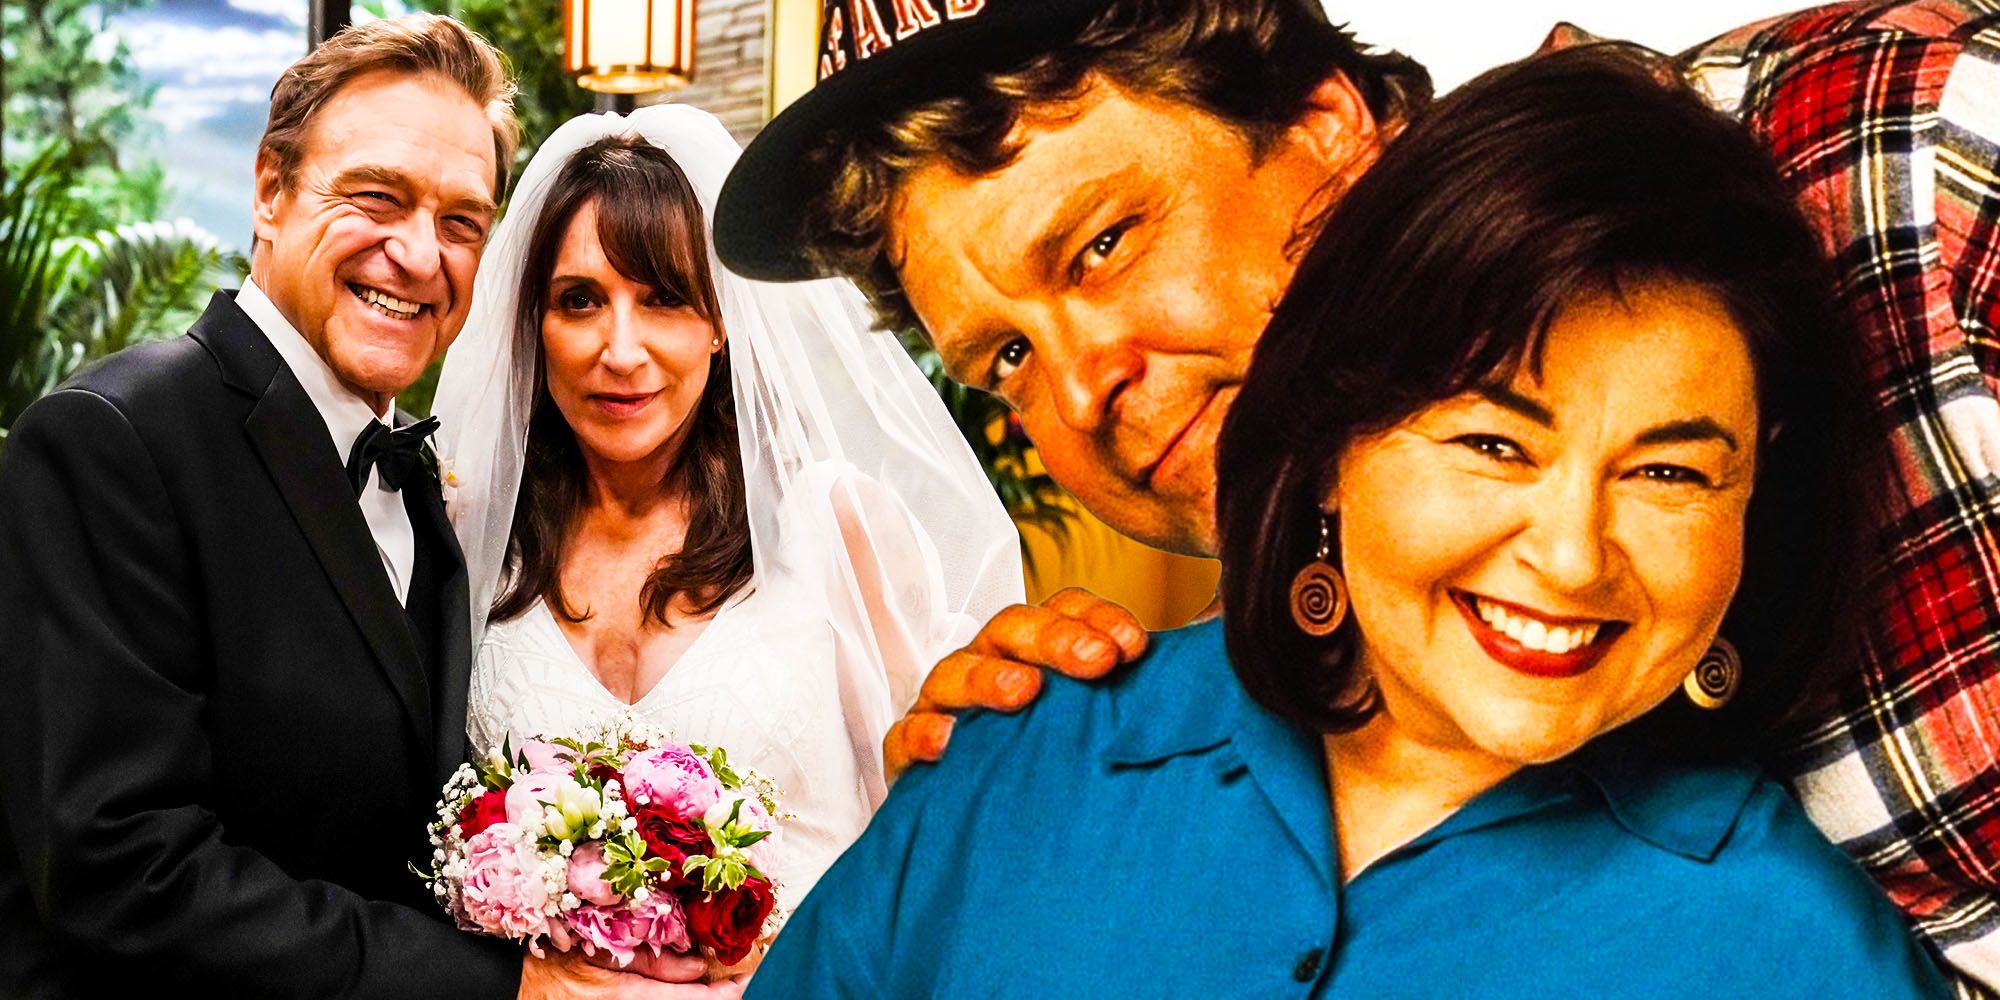 The Conners Dans Wedding Proves Show Still Struggling With Roseannes Legacy (& Exit)